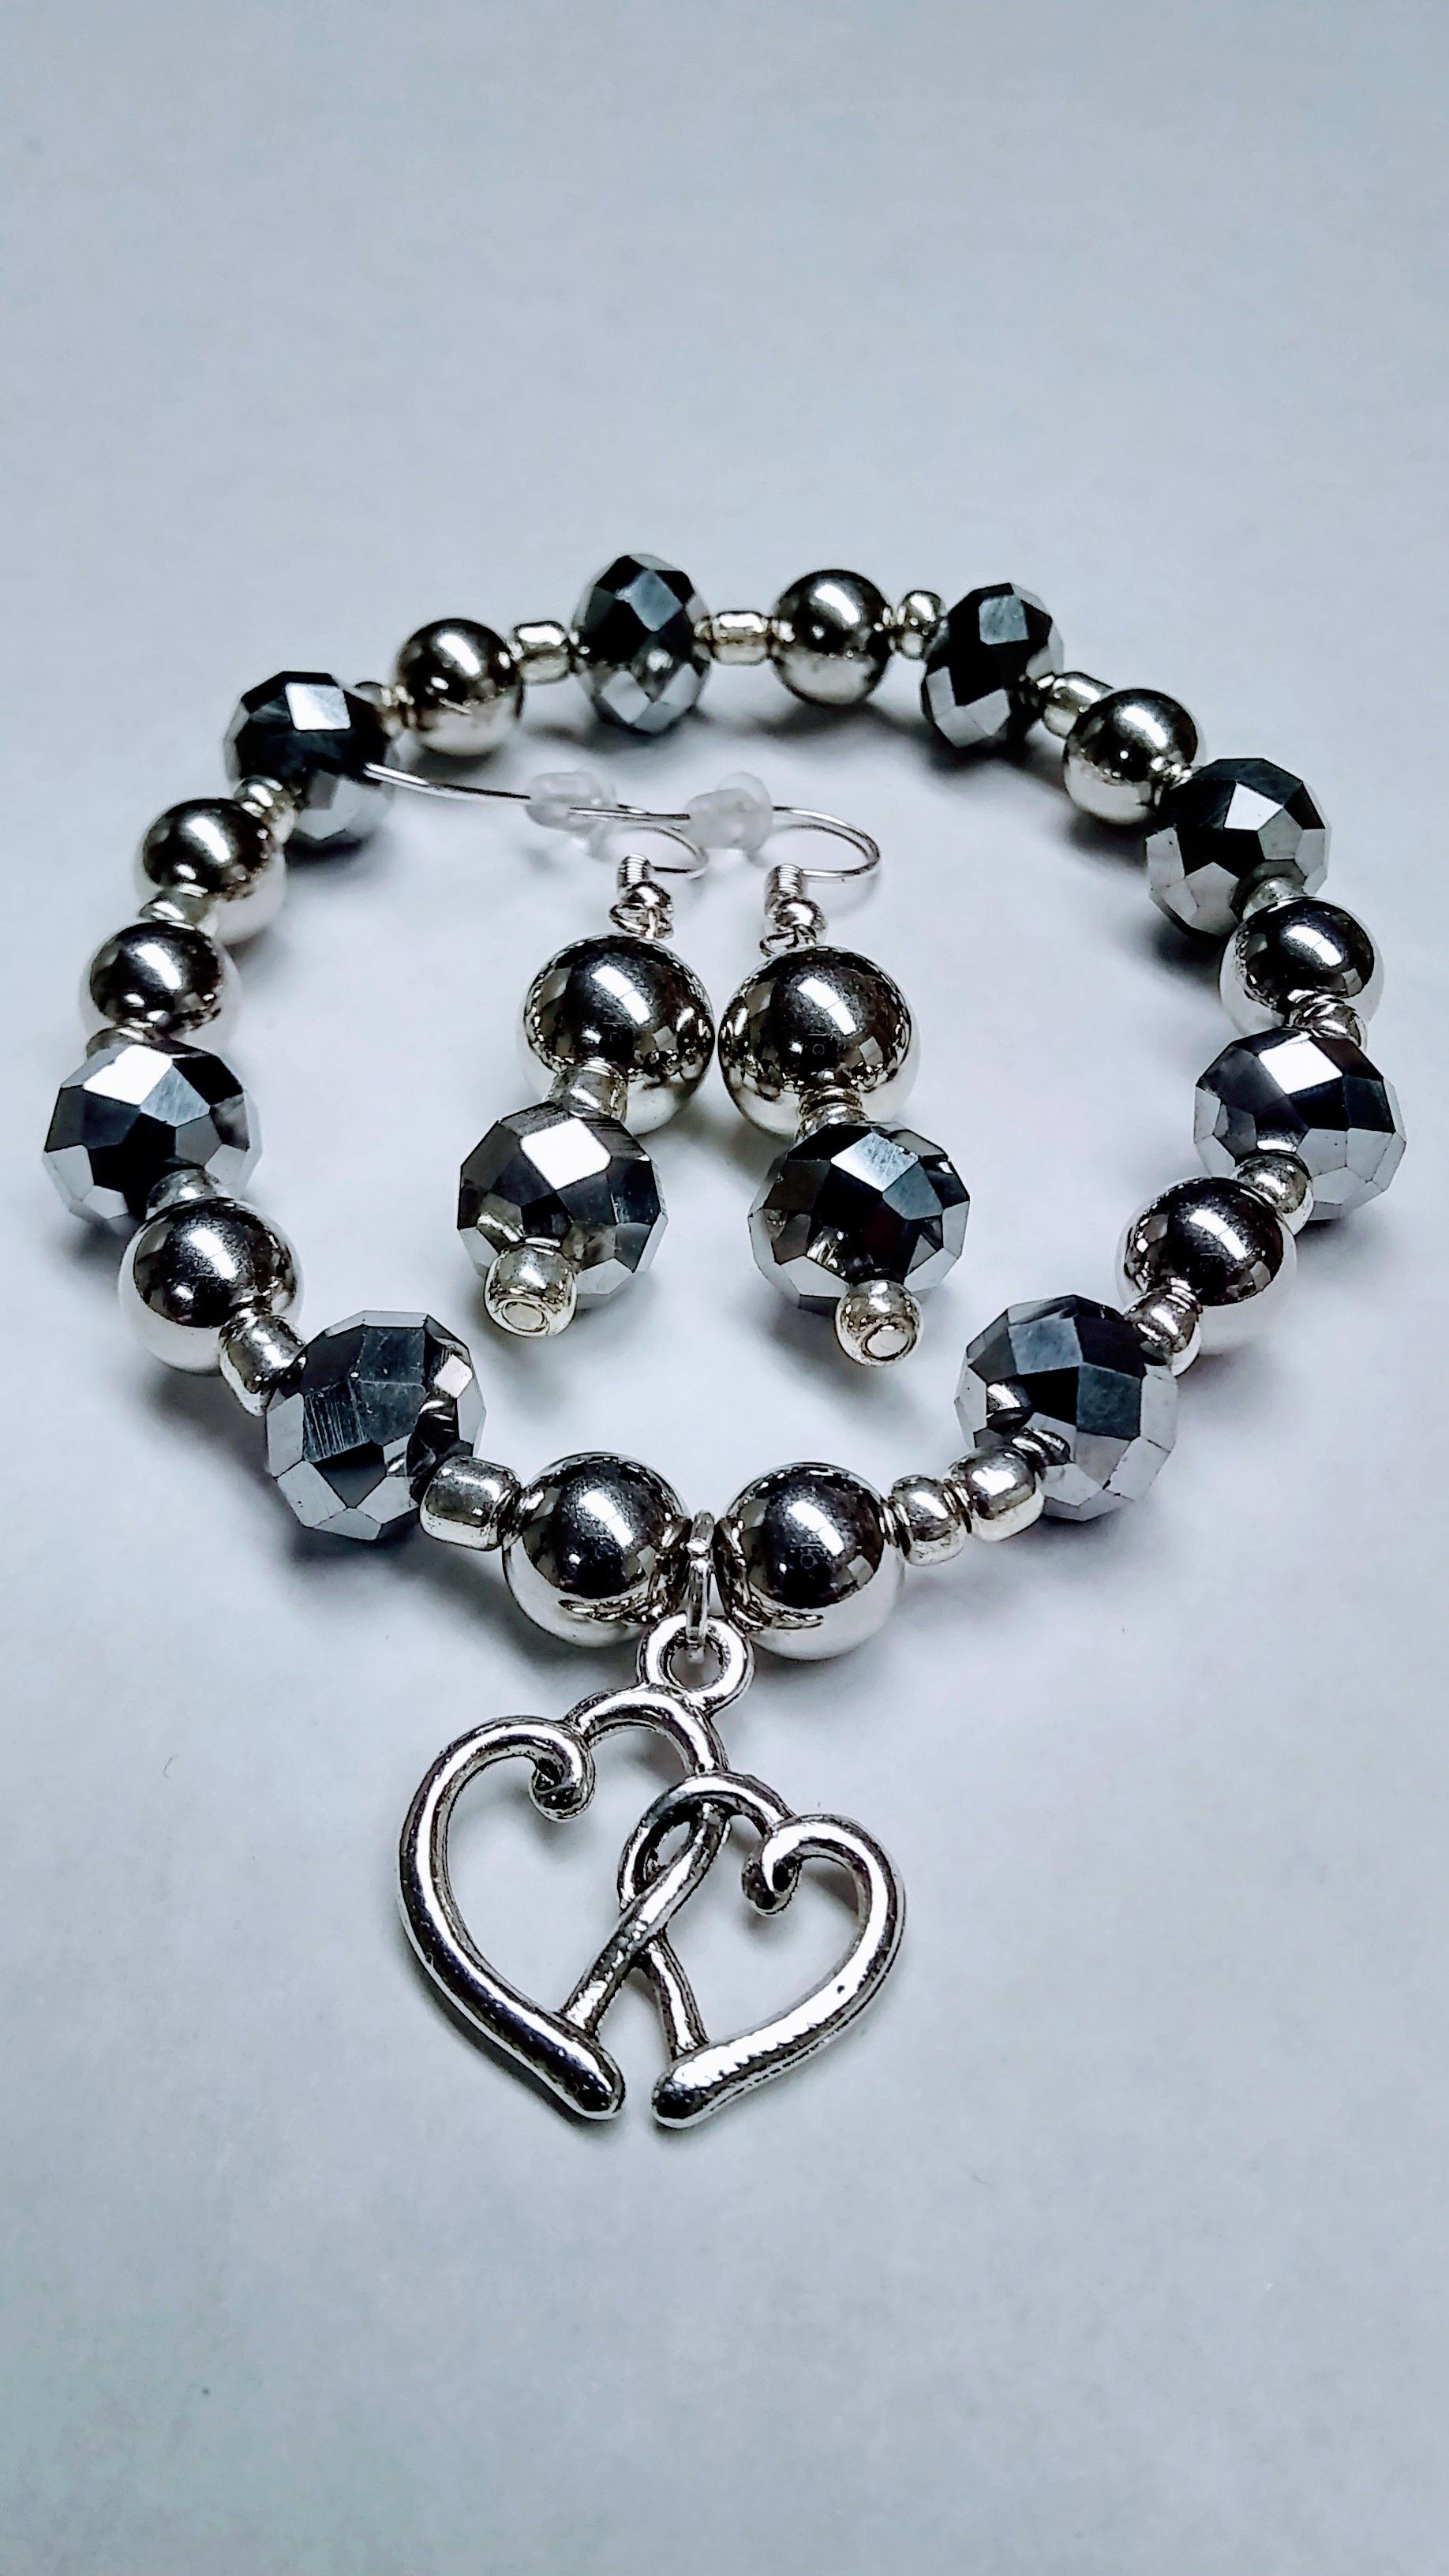 Beautifully refined bracelet and earring set